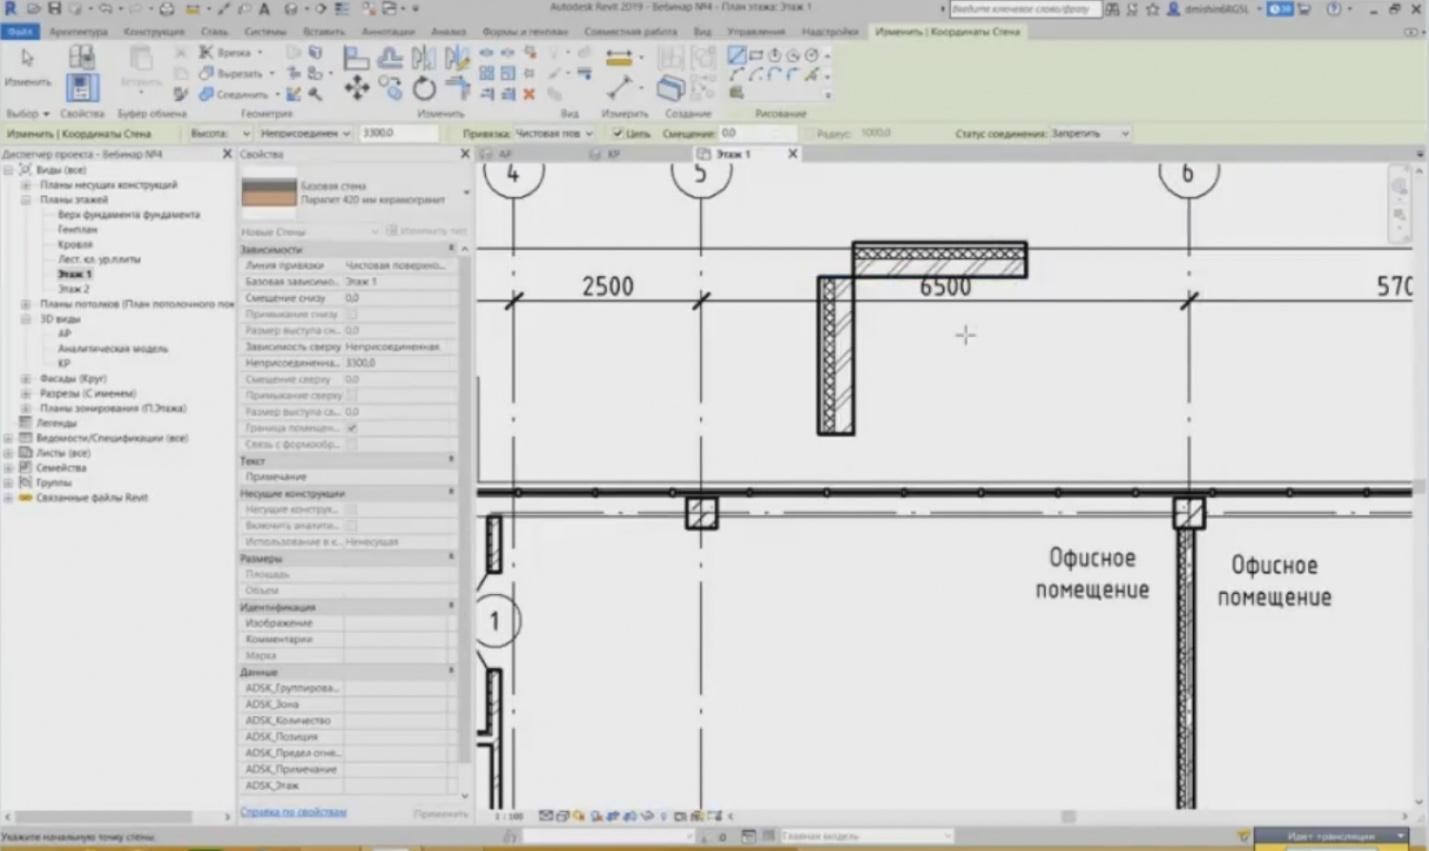 BIM DESIGN IN REVIT. CREATING ARCHITECTURAL AND STRUCTURAL ELEMENTS. PAGE 2-11